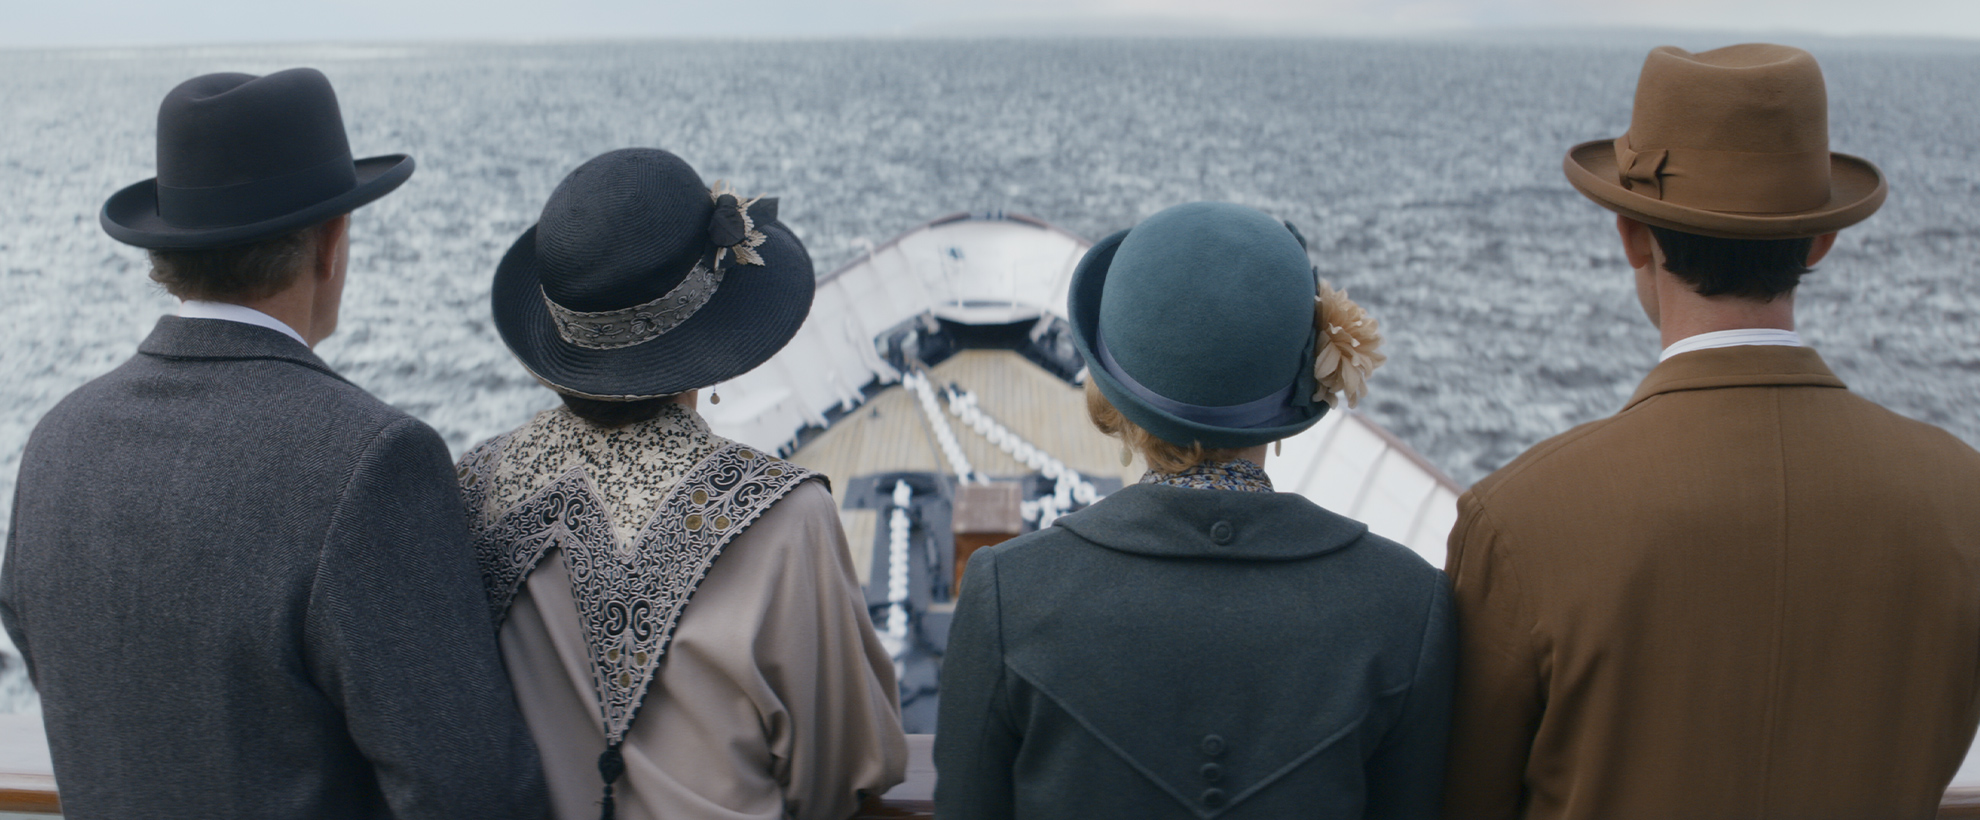 Four characters stand at the helm of a boat, looking out over the ocean